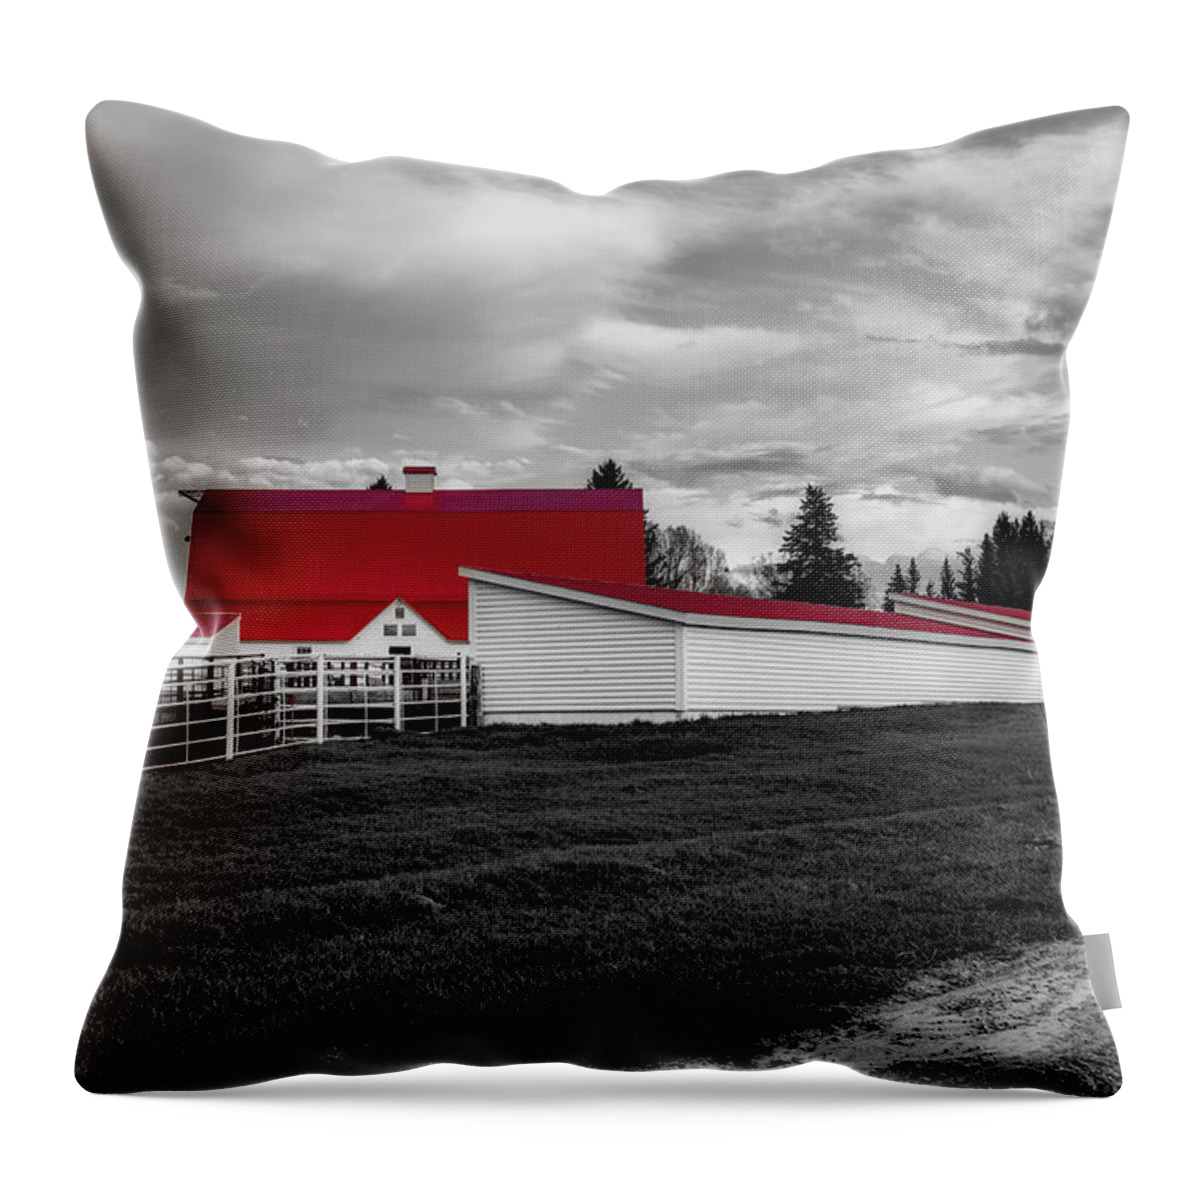 Wyoming Throw Pillow featuring the photograph Wyoming Ranch At Sunset by Mountain Dreams